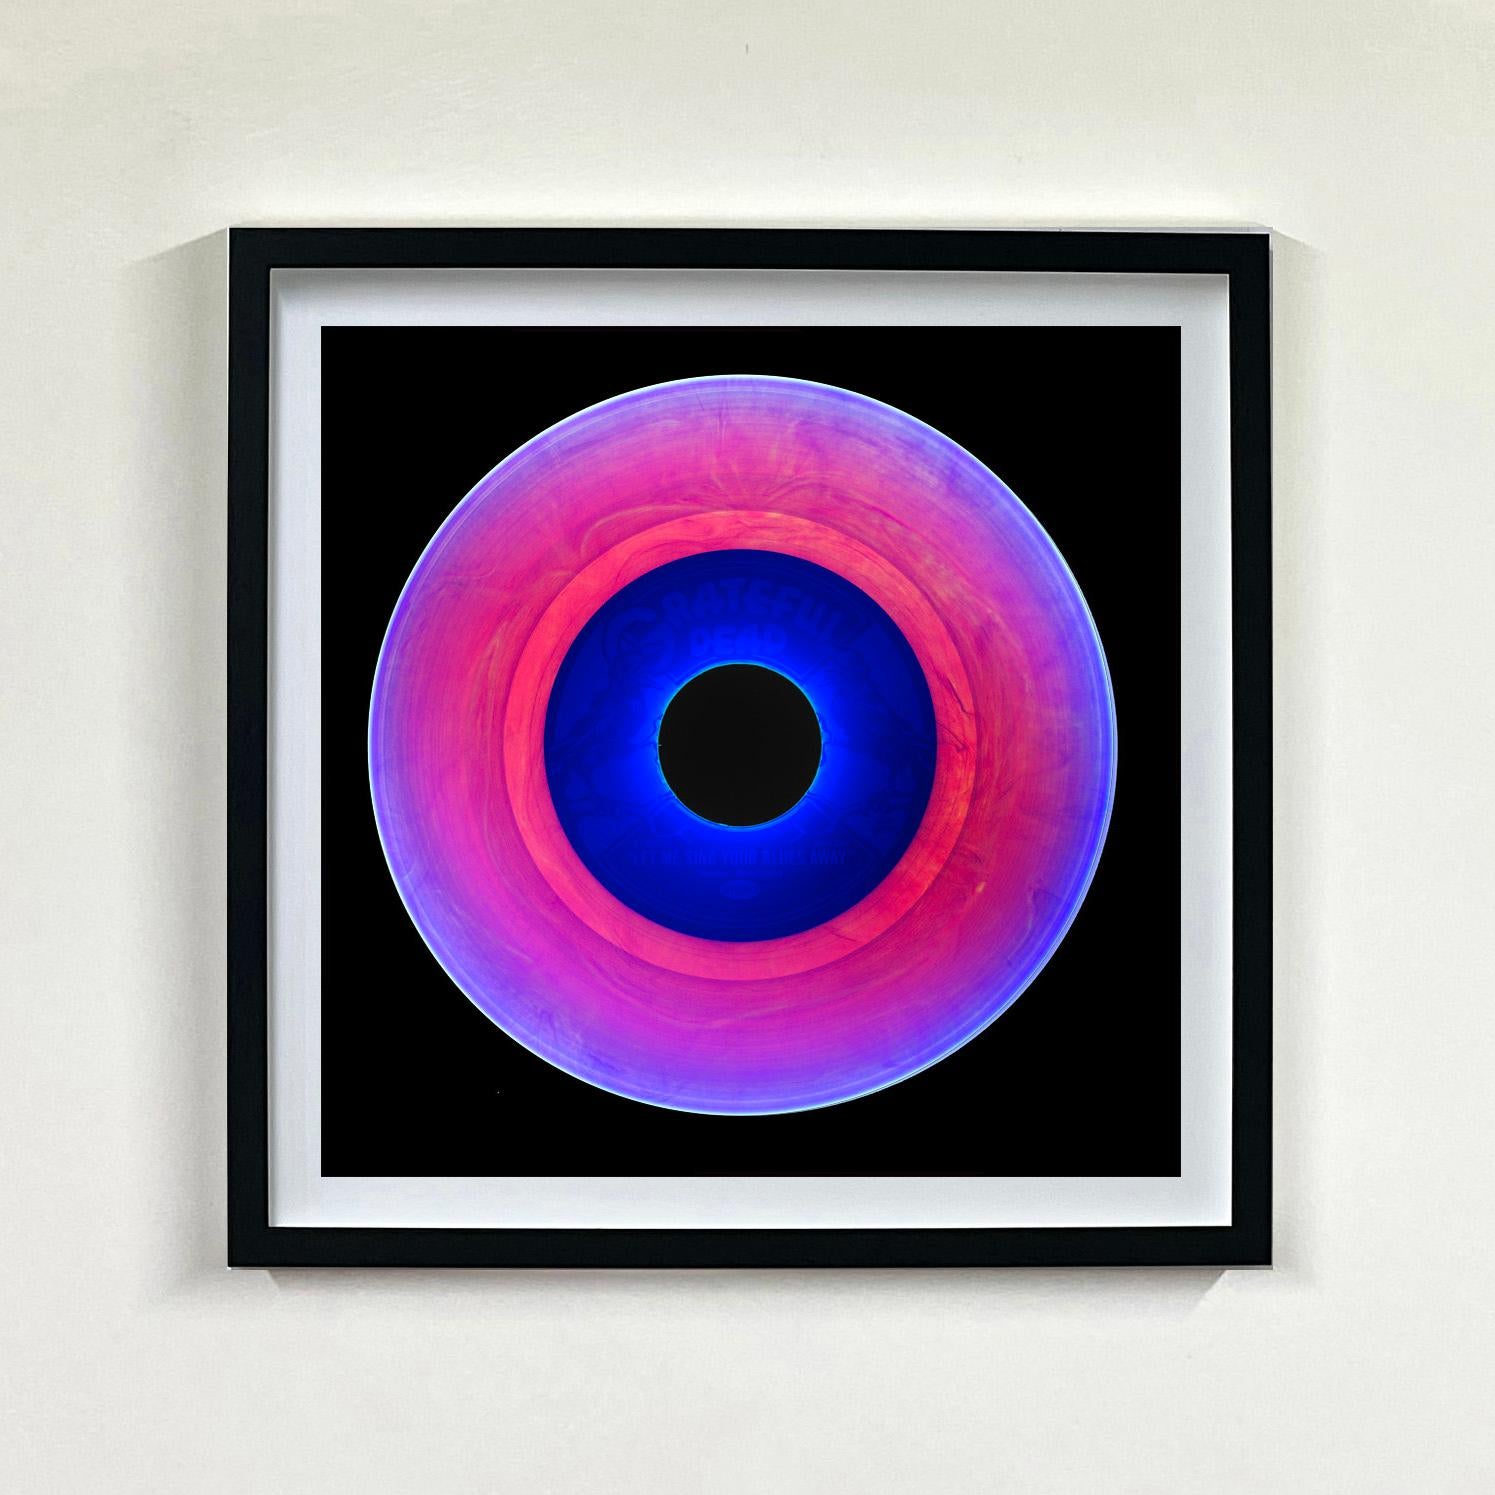 Heidler & Heeps Vinyl Collection Nine Piece Multicolor Installation.
Acclaimed contemporary photographers, Richard Heeps and Natasha Heidler have collaborated to make this beautifully mesmerising collection. A celebration of the vinyl record and